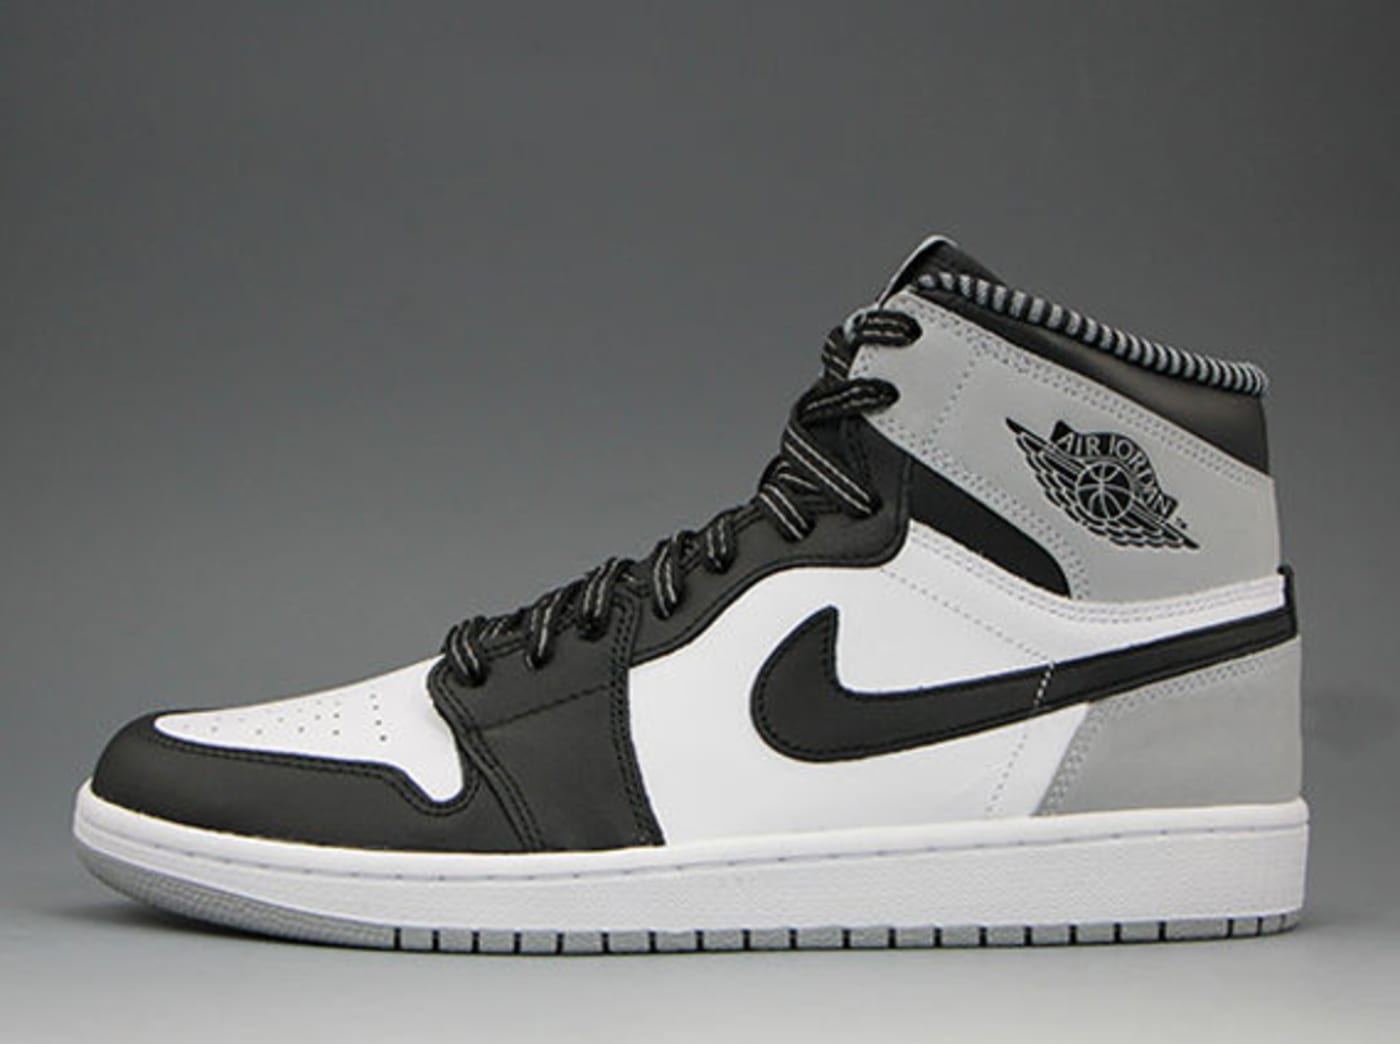 Slide Home With a Closer Look at the “Barons” Air Jordan 1 Retro